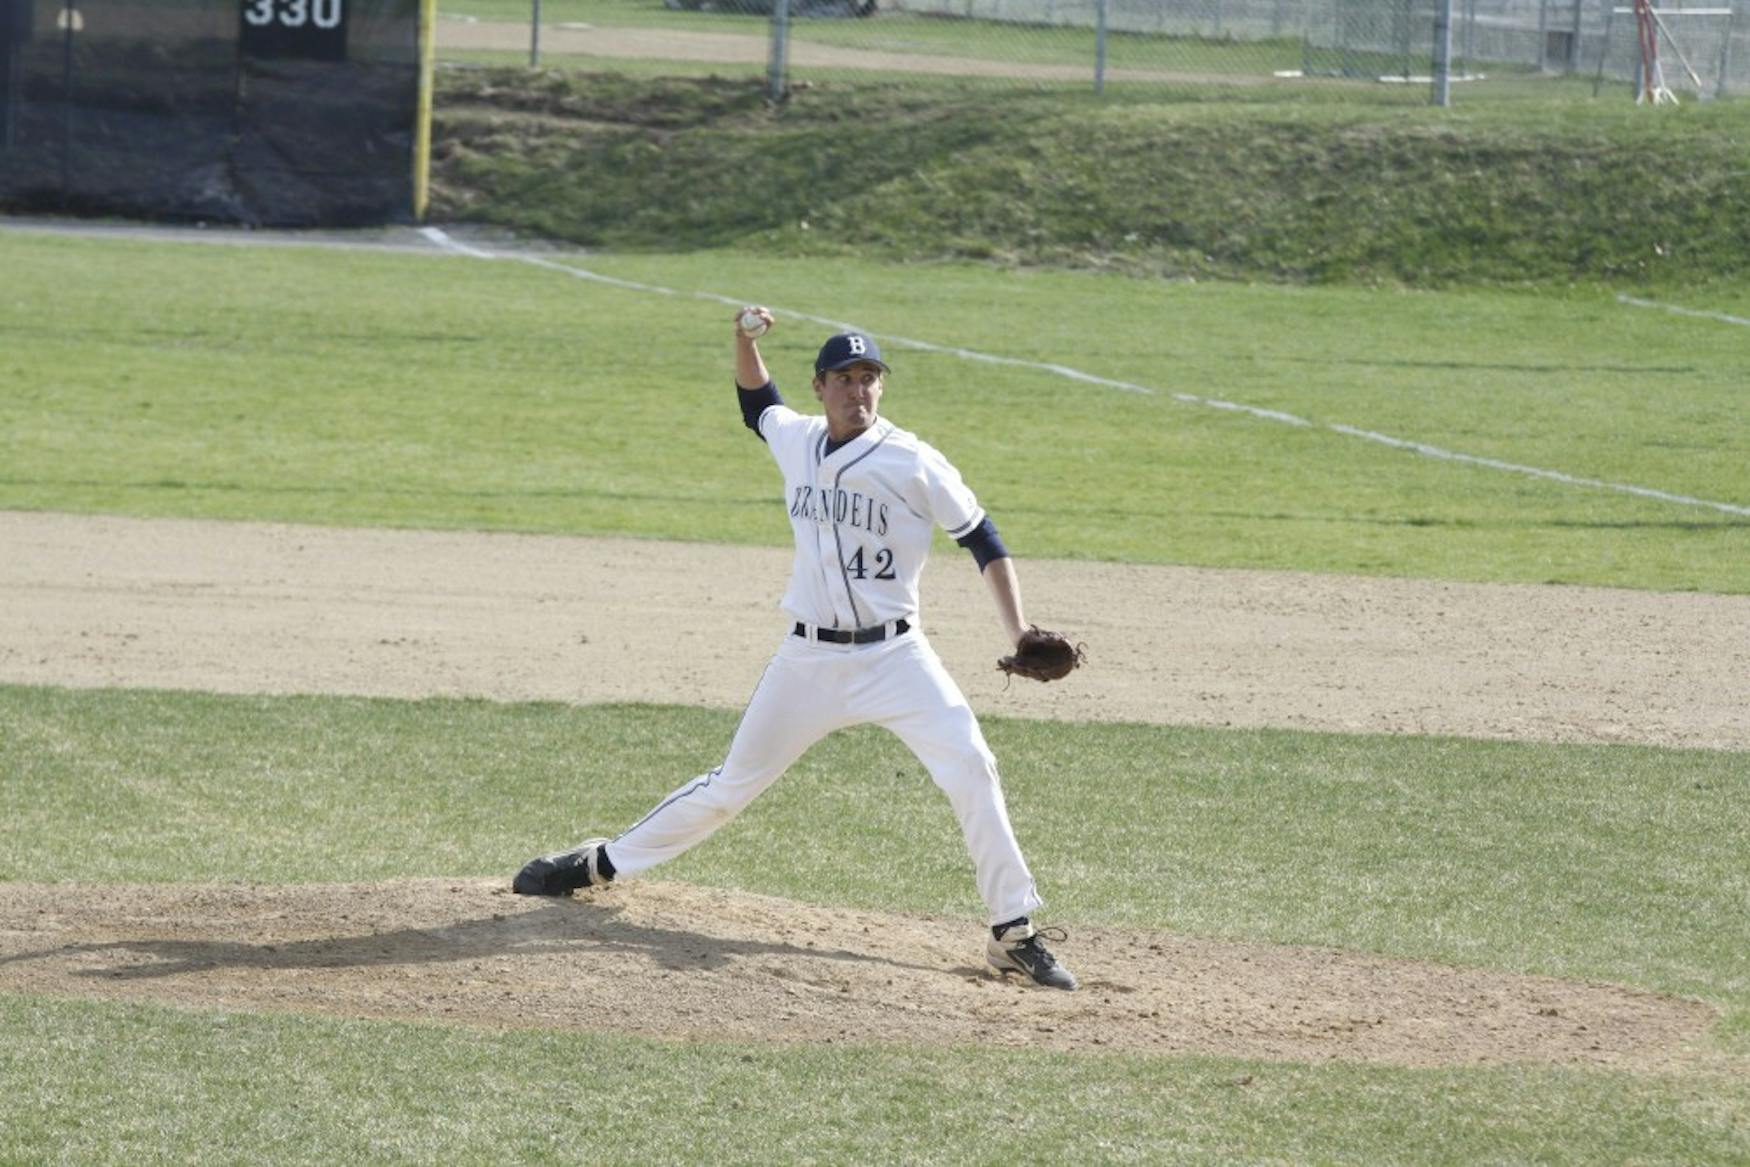 THE STRETCH: Pitcher Ryan Healy ’16 throws a pitch in the Judges’ 6-5 victory in 11 innings over Curry College last April 22.